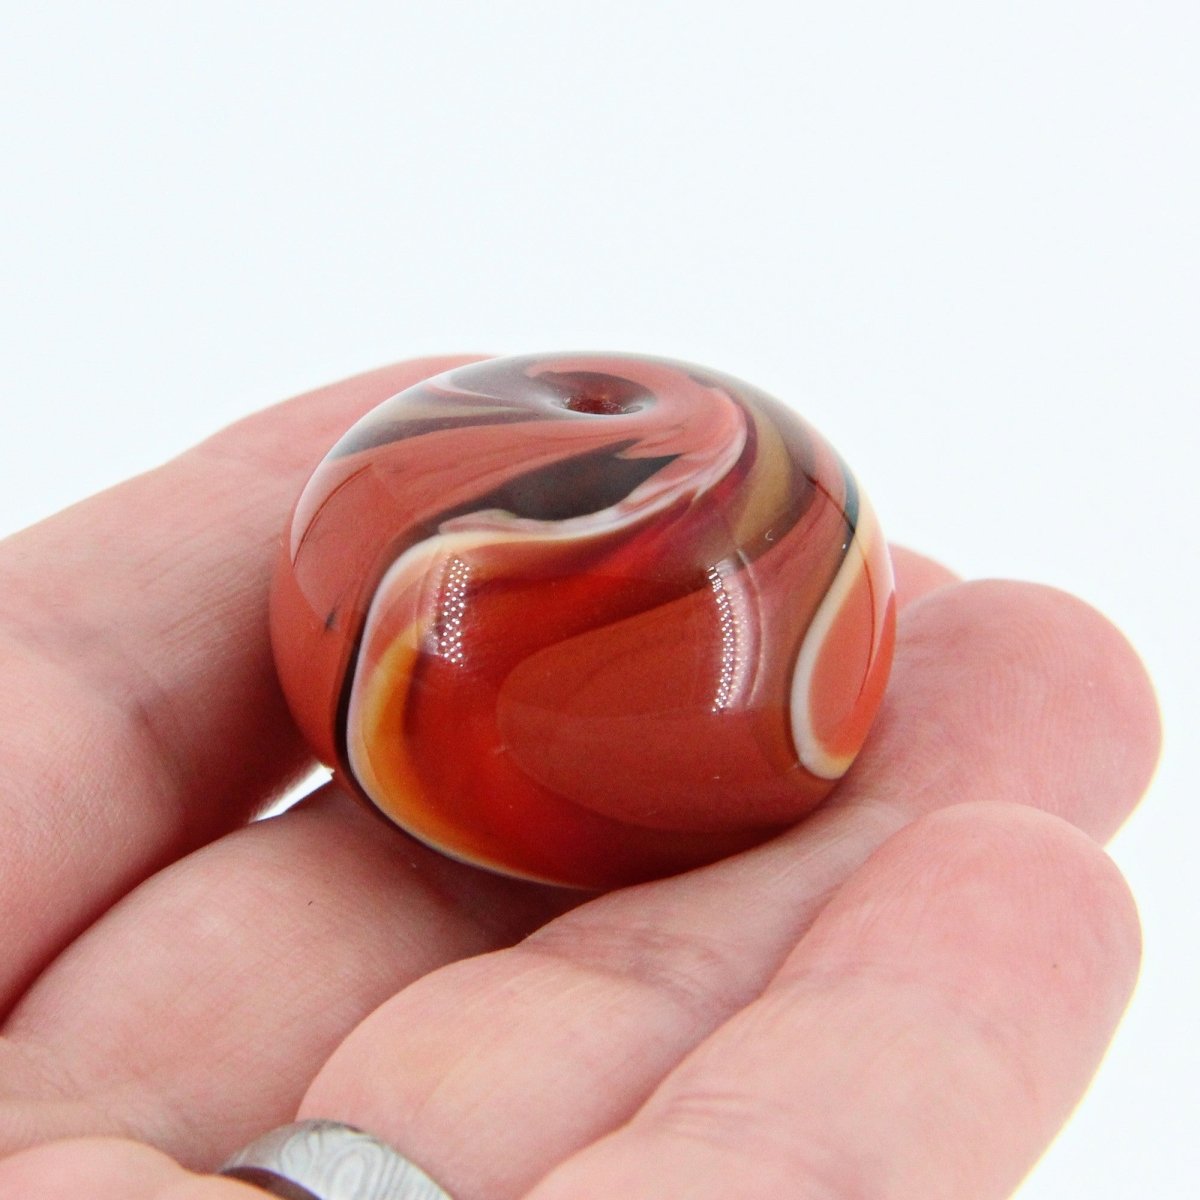 Red and Orange Striped Statement Bead - Handmade Glass Lampwork, Unique Focal Bead for Pendant, Suncatcher, or Home Decorating